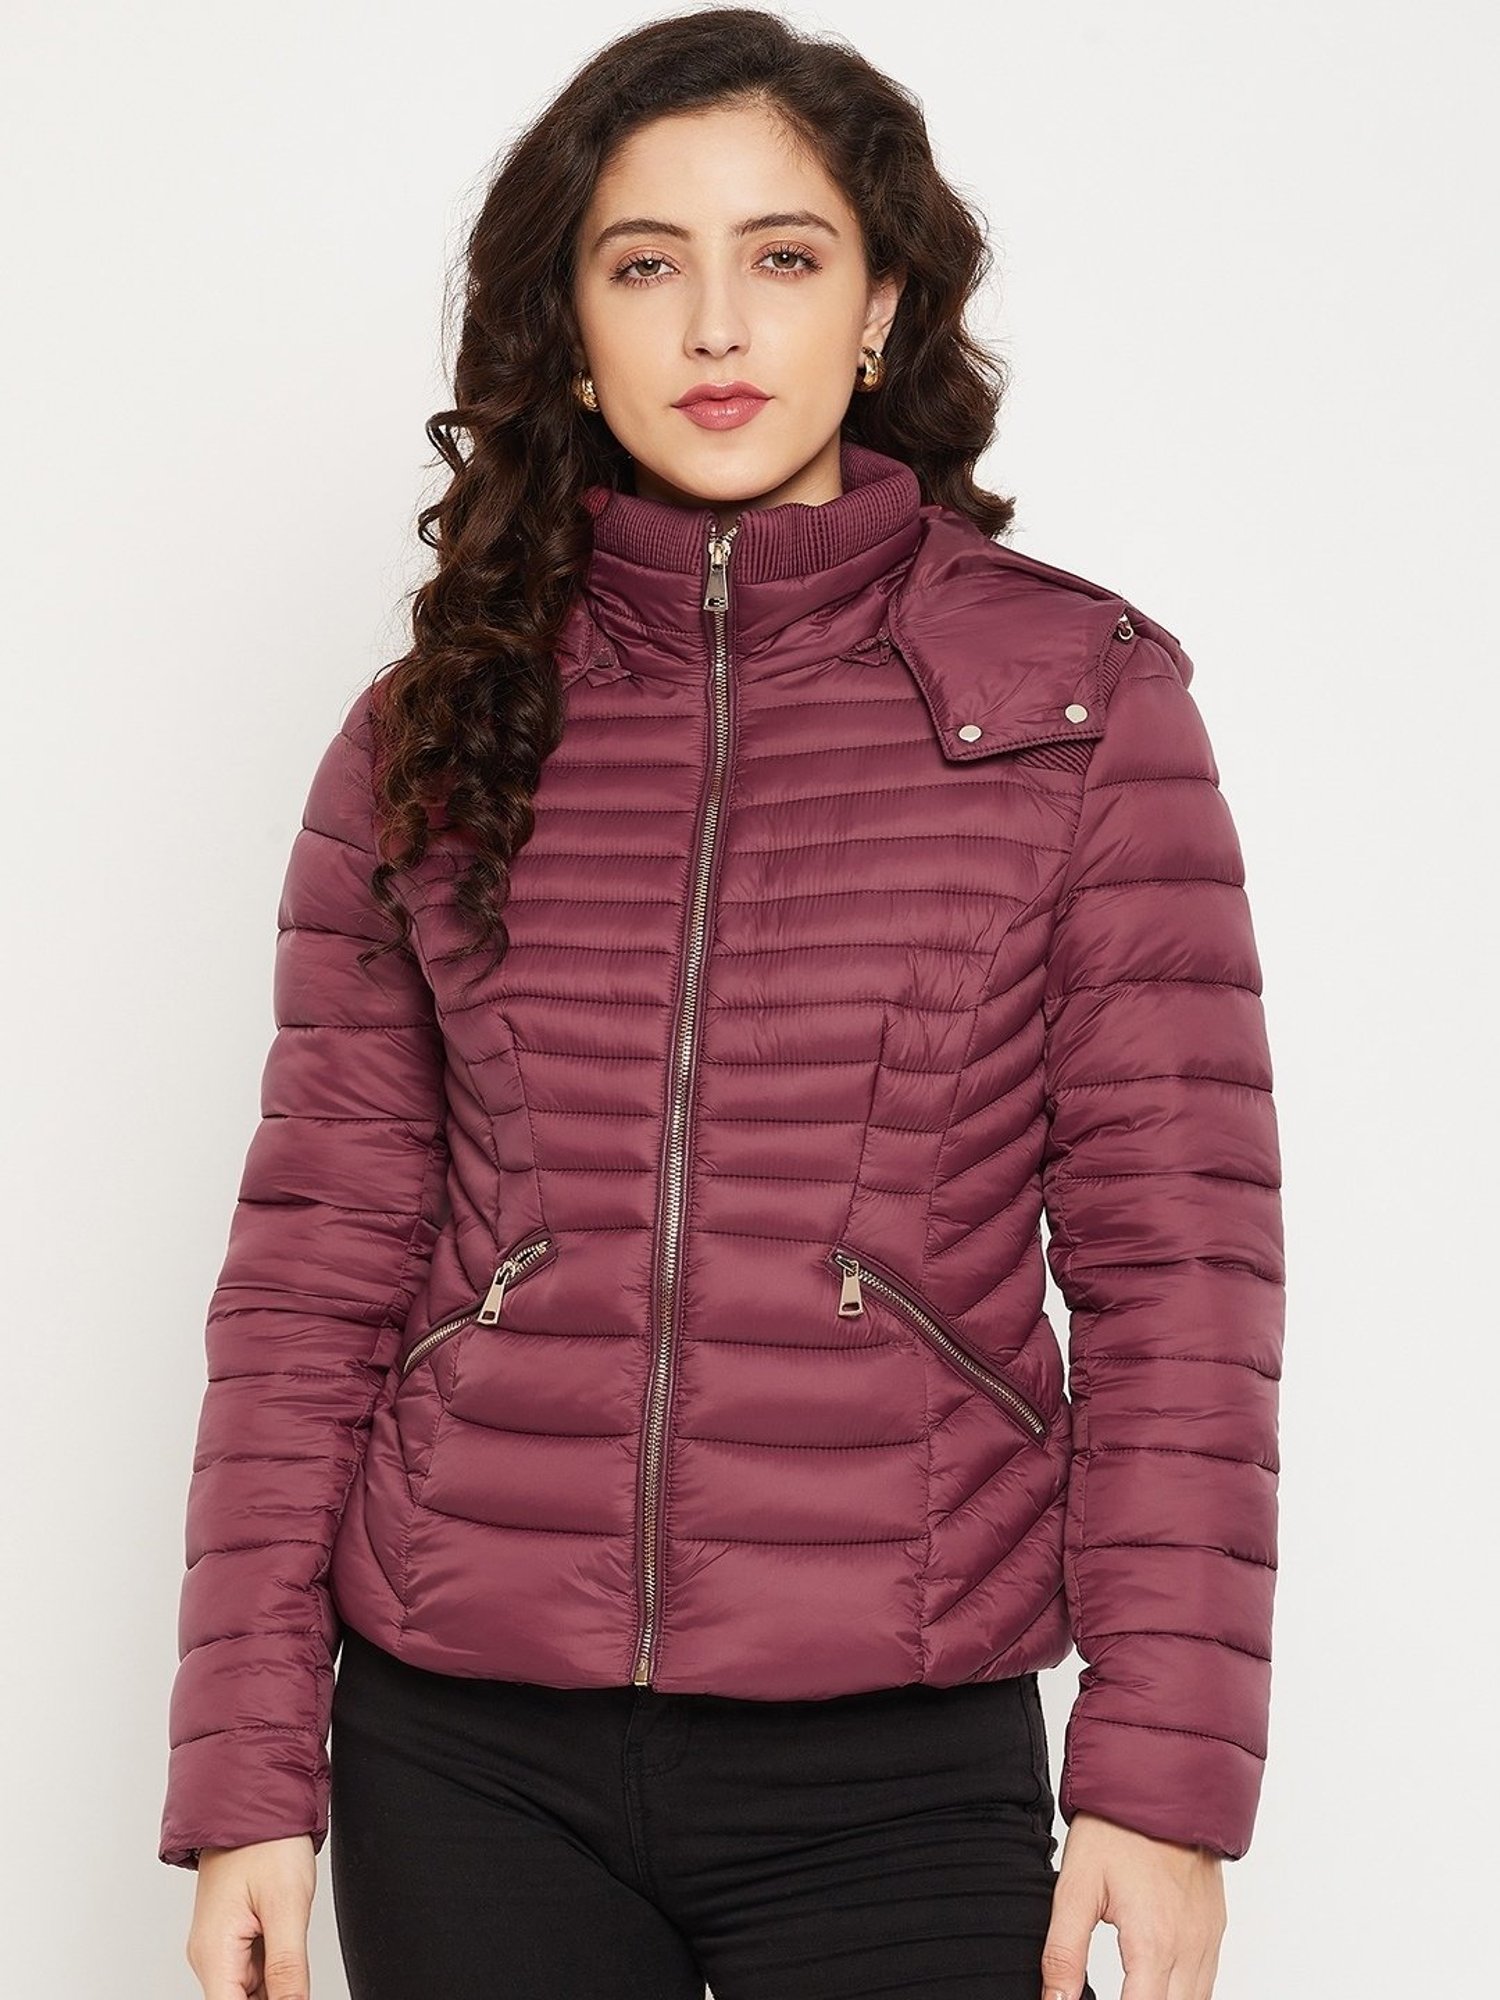 Burgundy Puffer Jacket Outfits For Women (23 ideas & outfits) | Lookastic